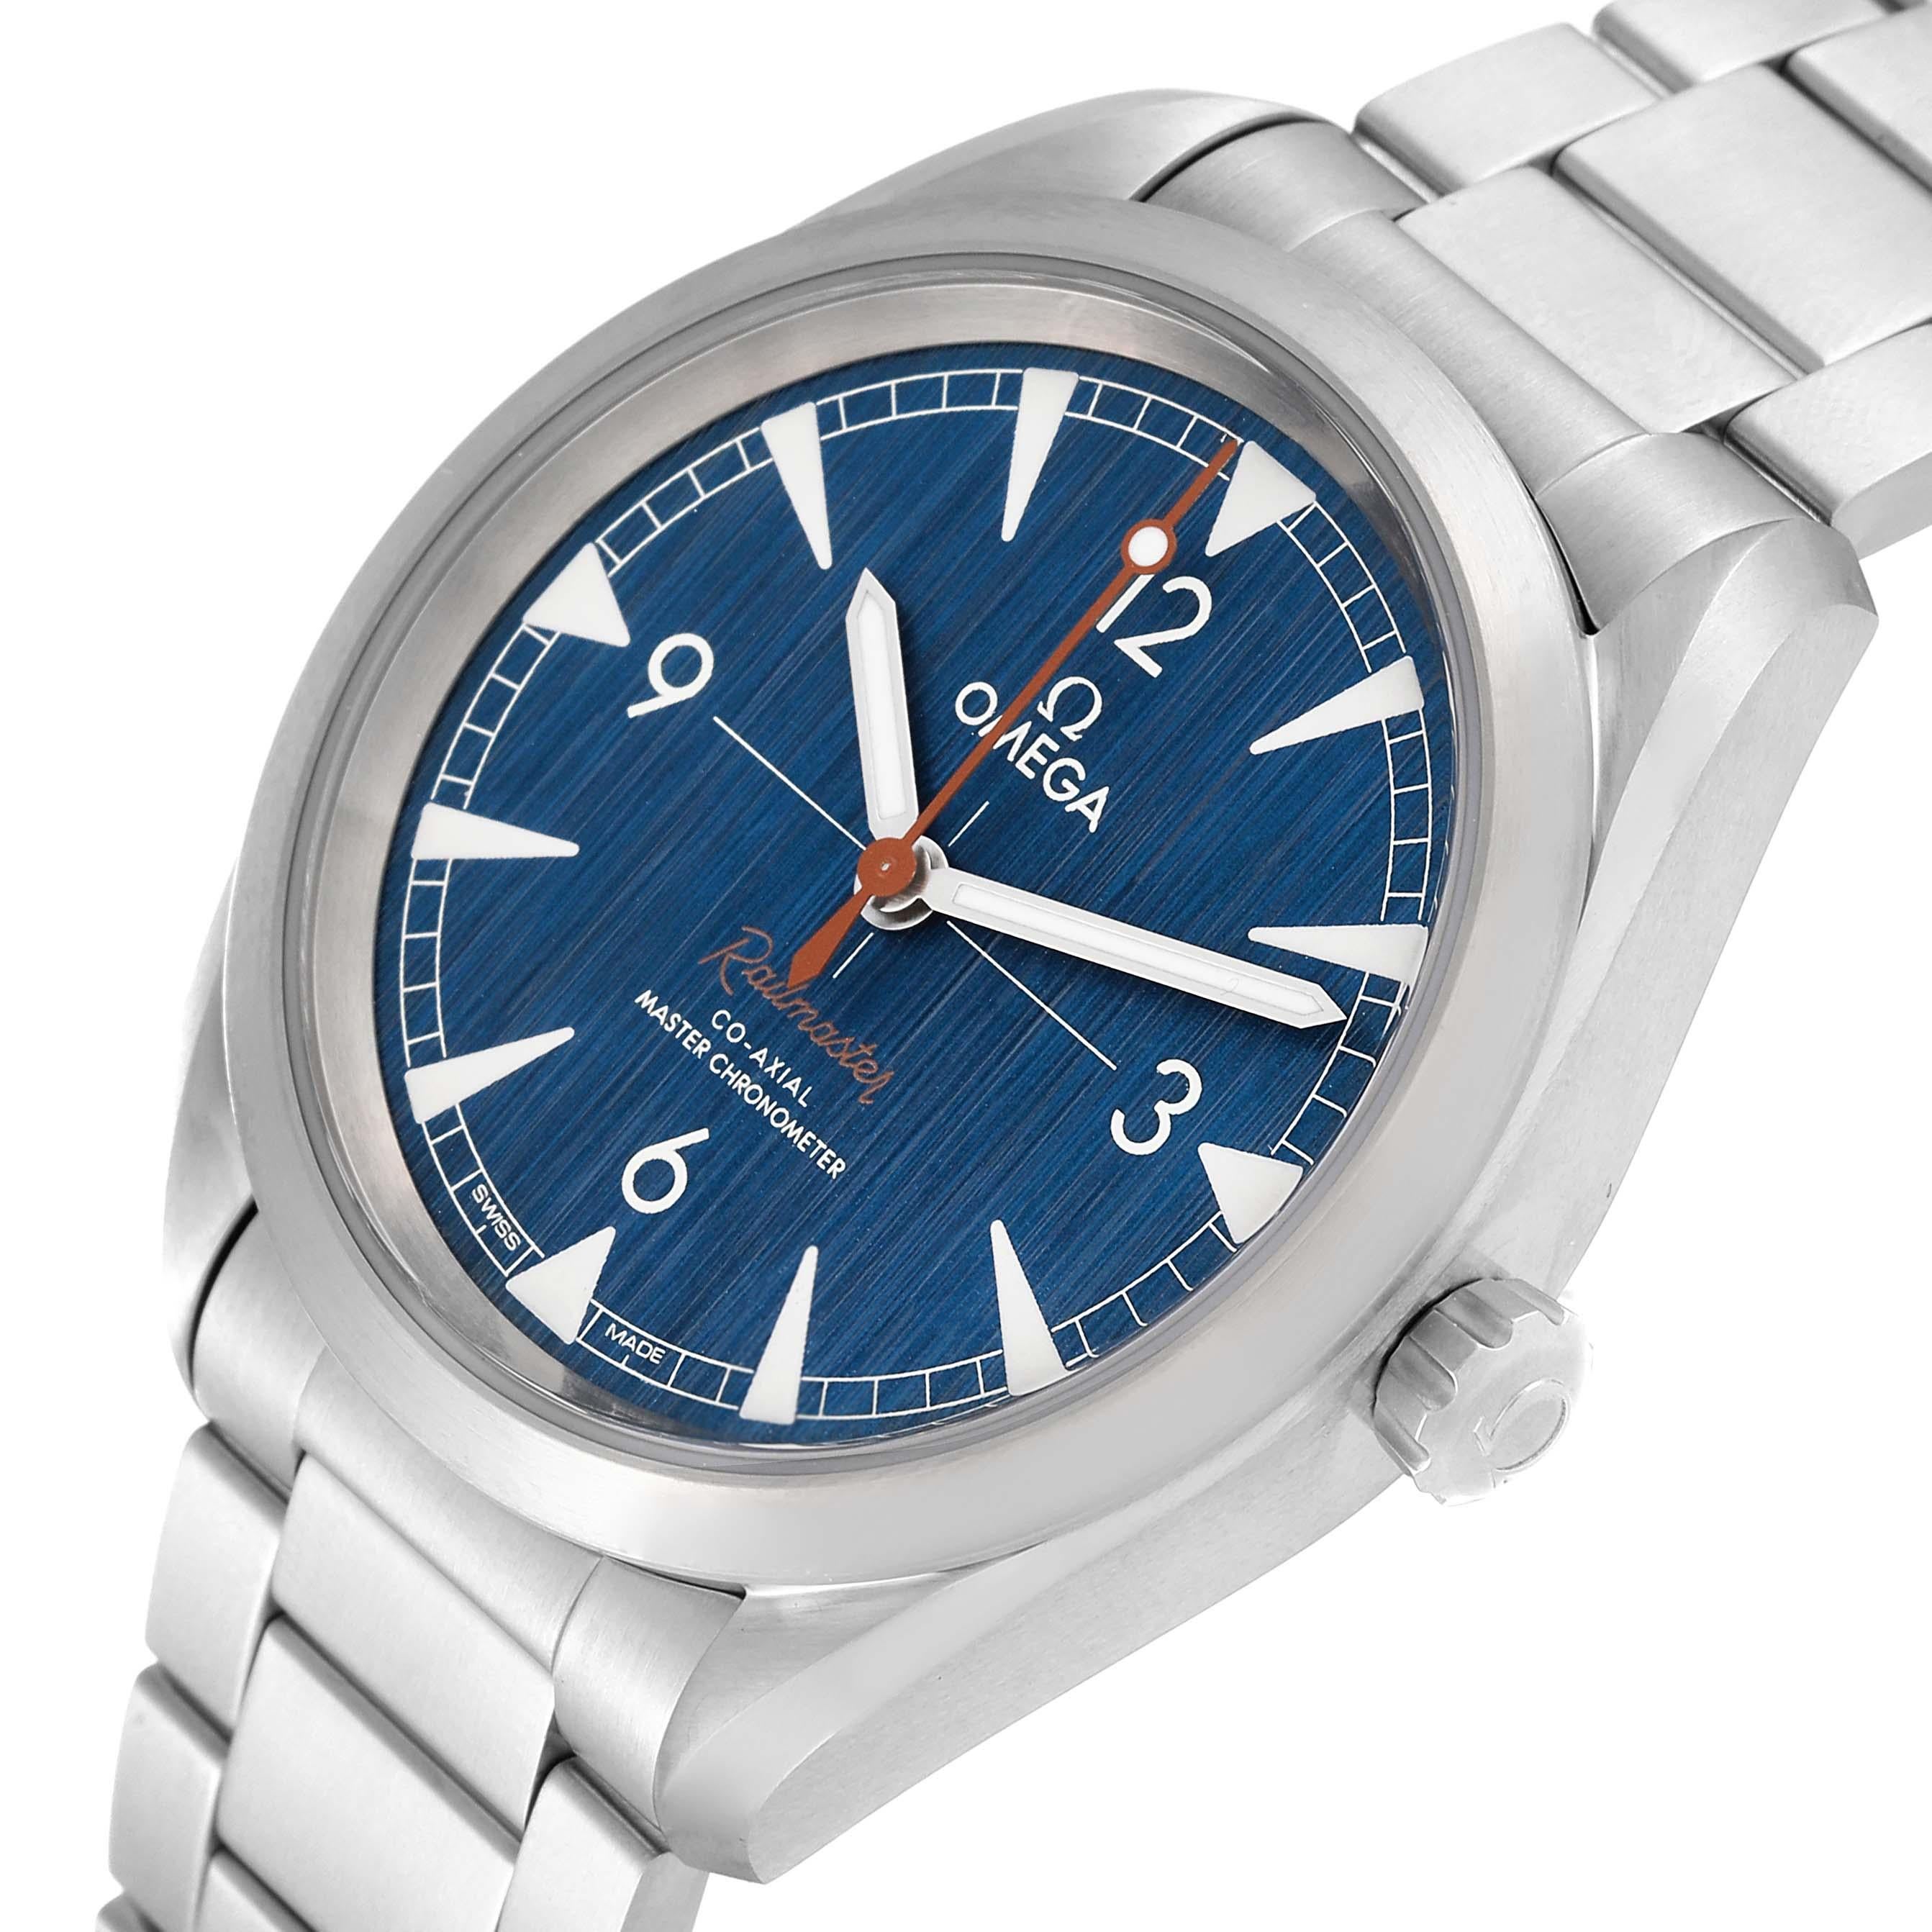 Omega Seamaster Railmaster Steel Mens Watch 220.10.40.20.03.001 Unworn. Omega calibre 8806 automatic self-winding movement, 55-hour power reserve with Co-Axial escapement. Certified Master Chronometer, approved by METAS, resistant to magnetic fields